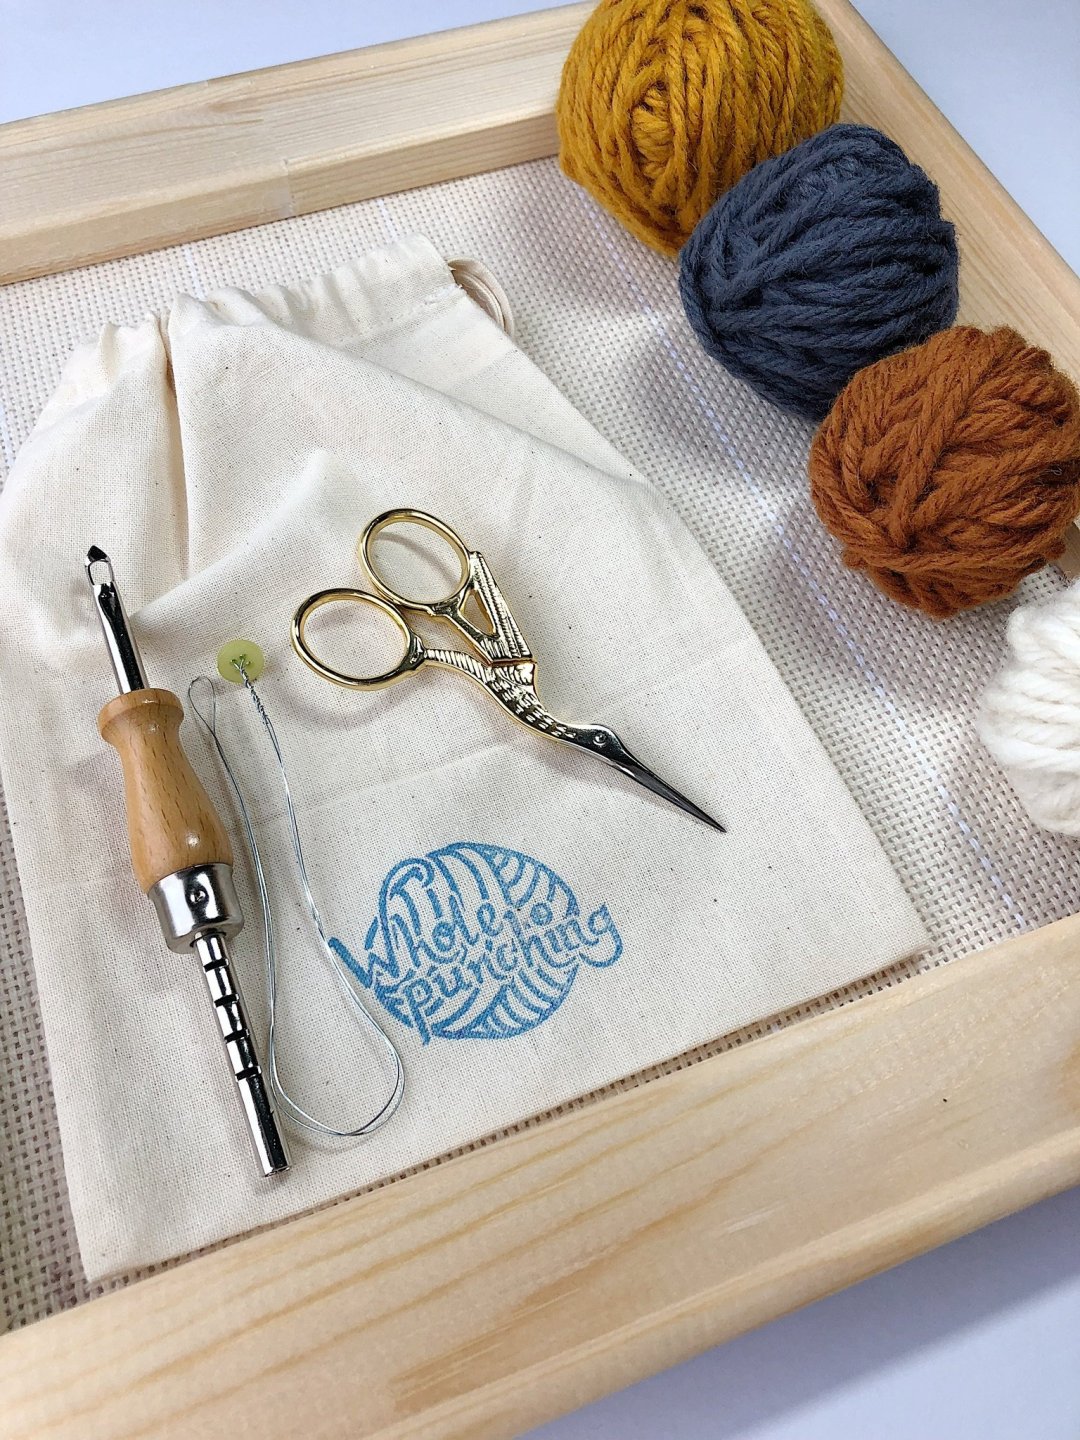 30 Days of Gift Ideas: Punch Needle Embroidery Kit for ...